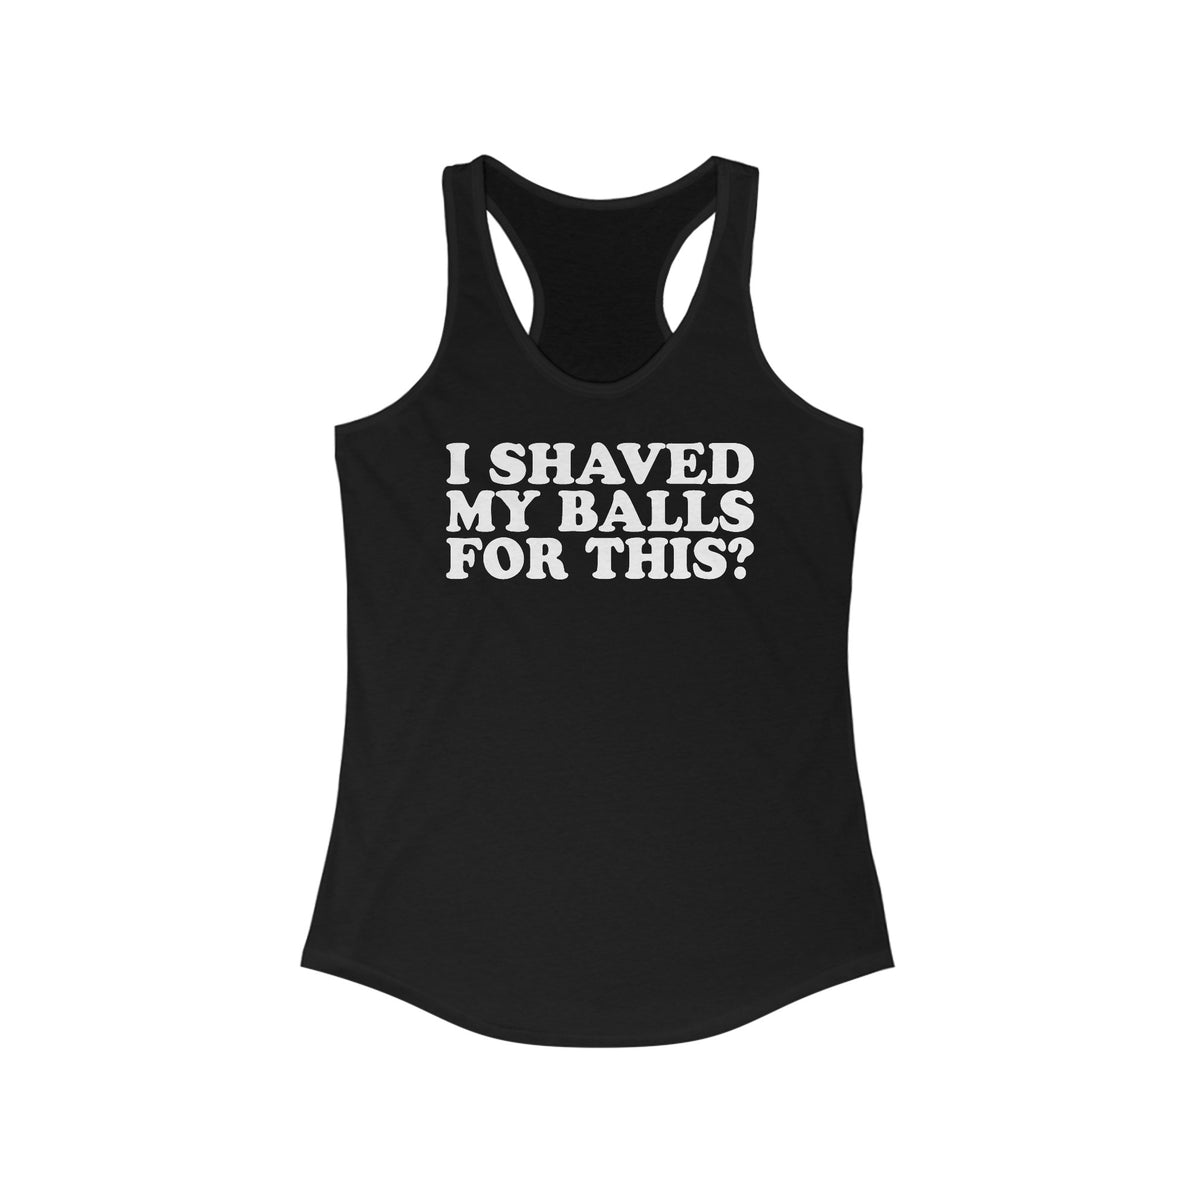 I Shaved My Balls For This? - Women’s Racerback Tank